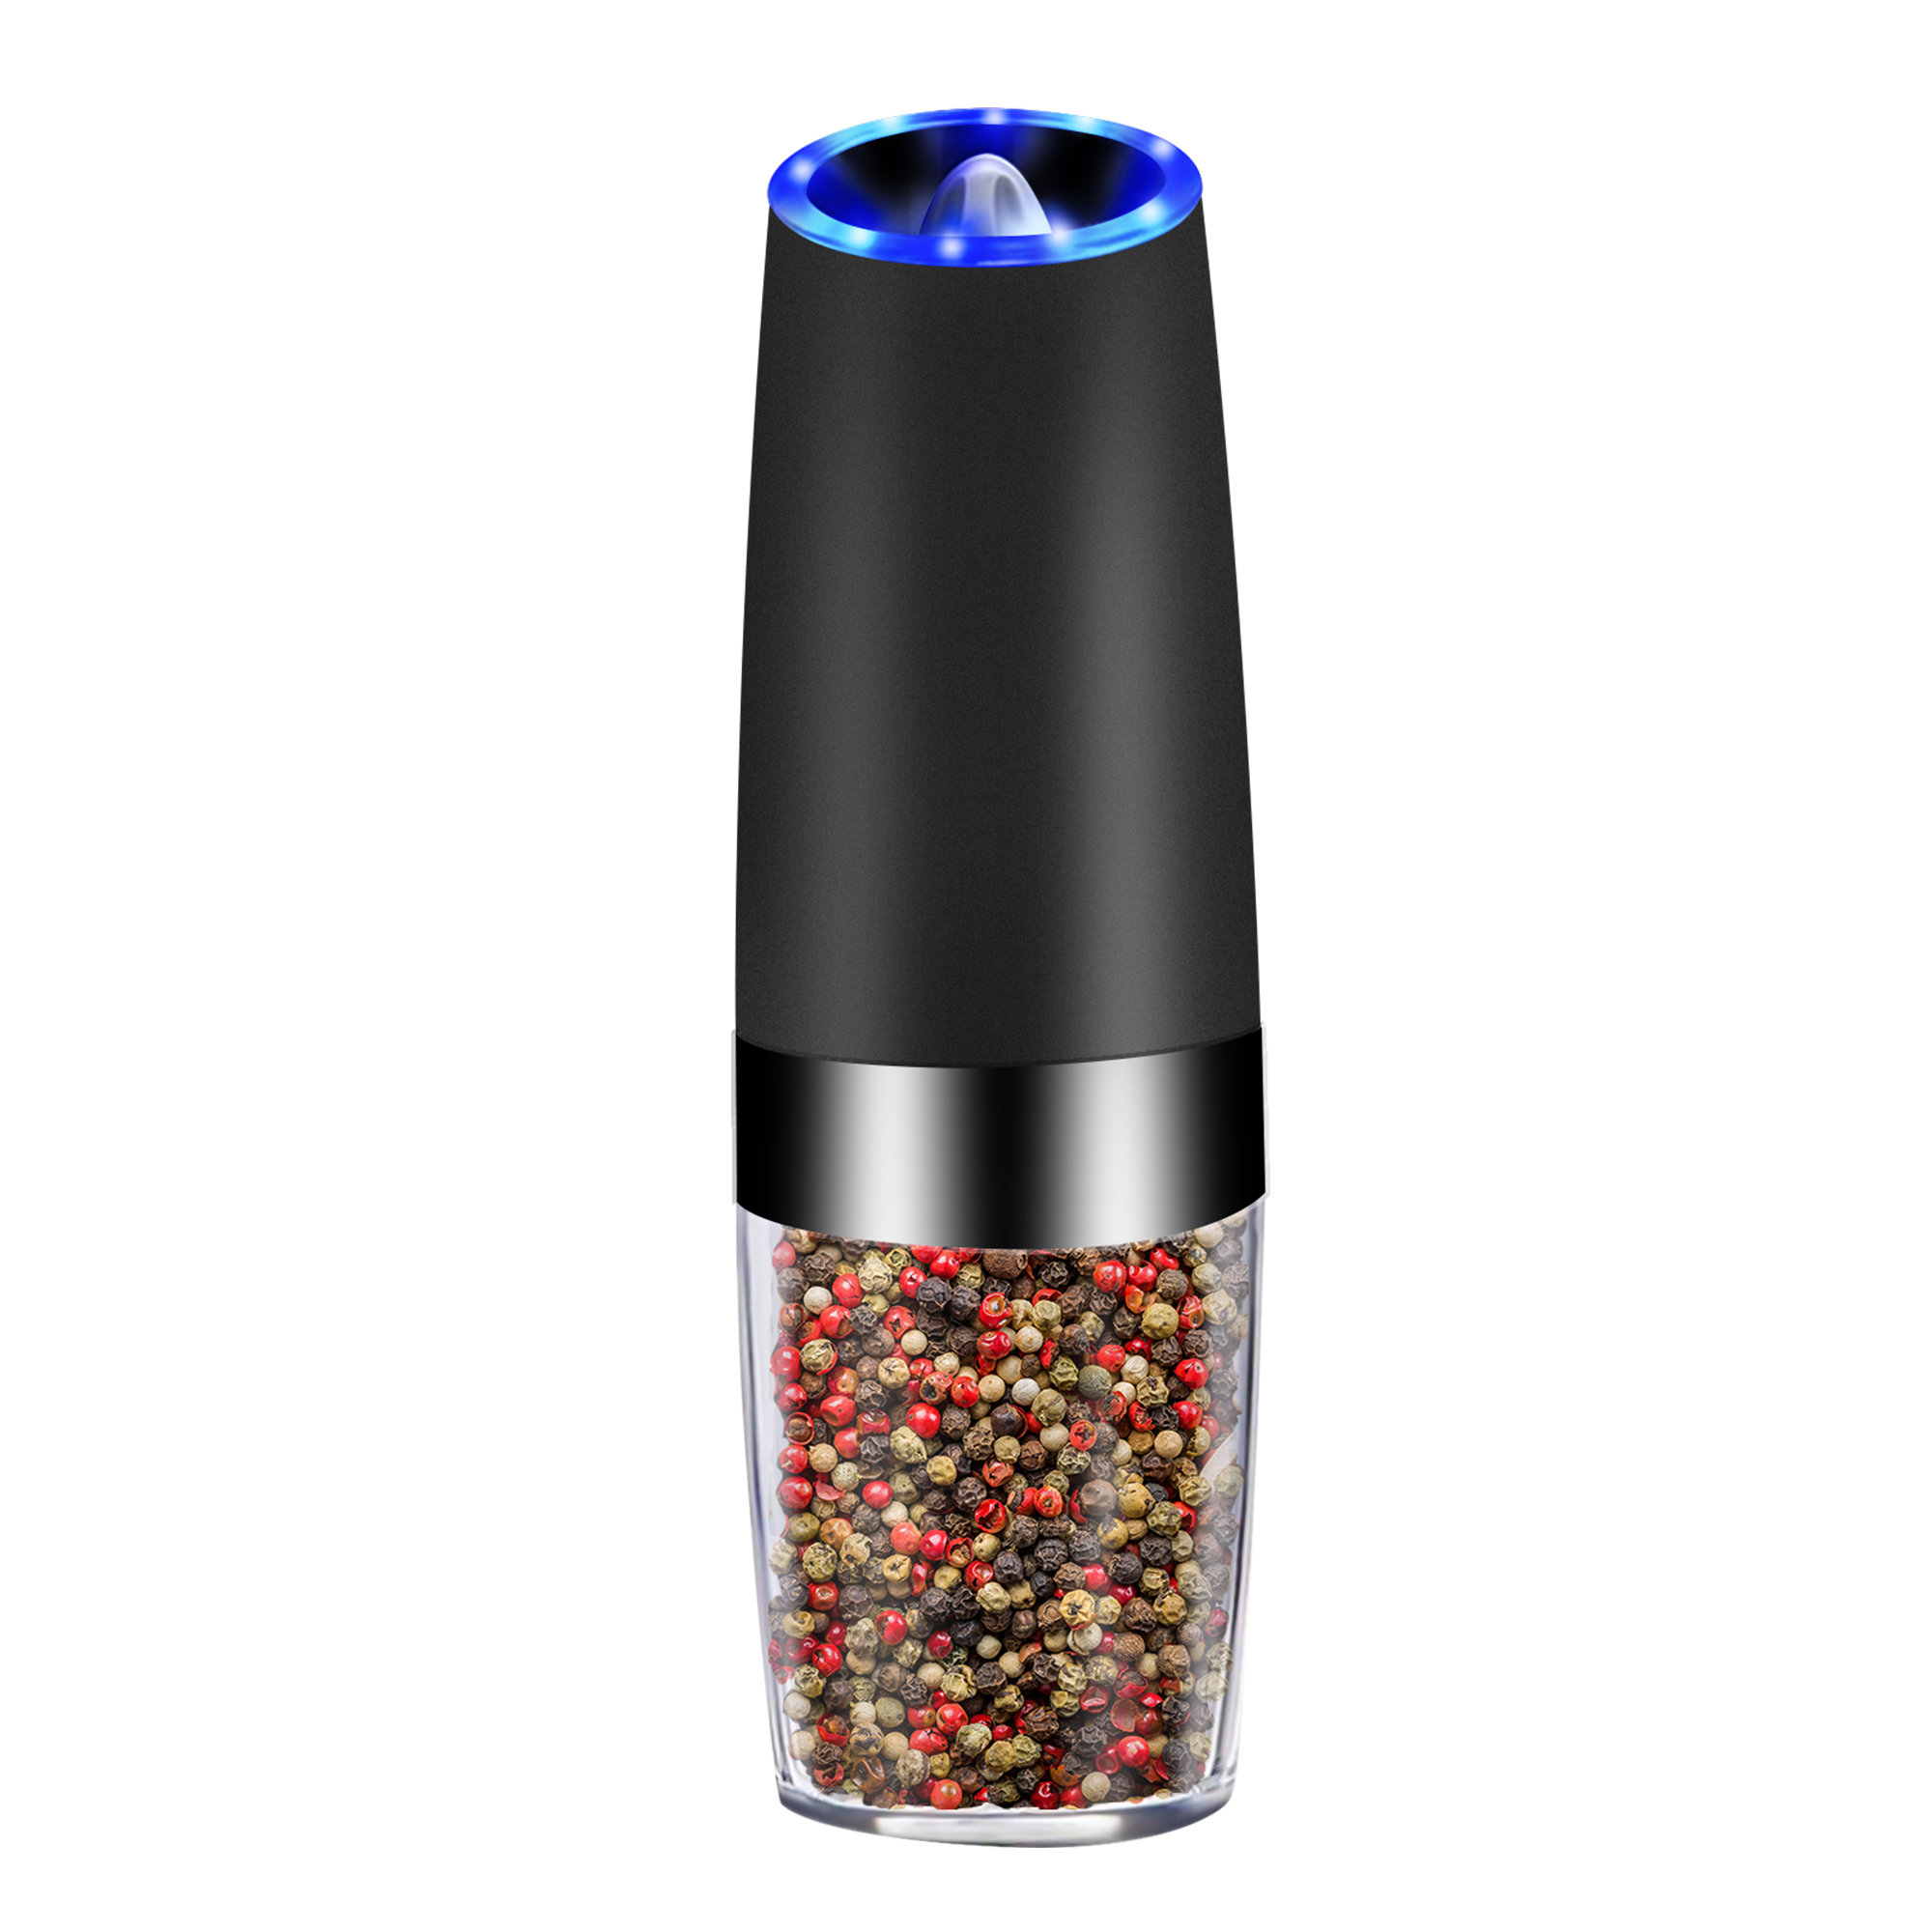 Gravity Electric Salt Pepper Grinder - Automatic Battery Powered,  Adjustable Coarseness, Blue LED Light, Great Mother's Day